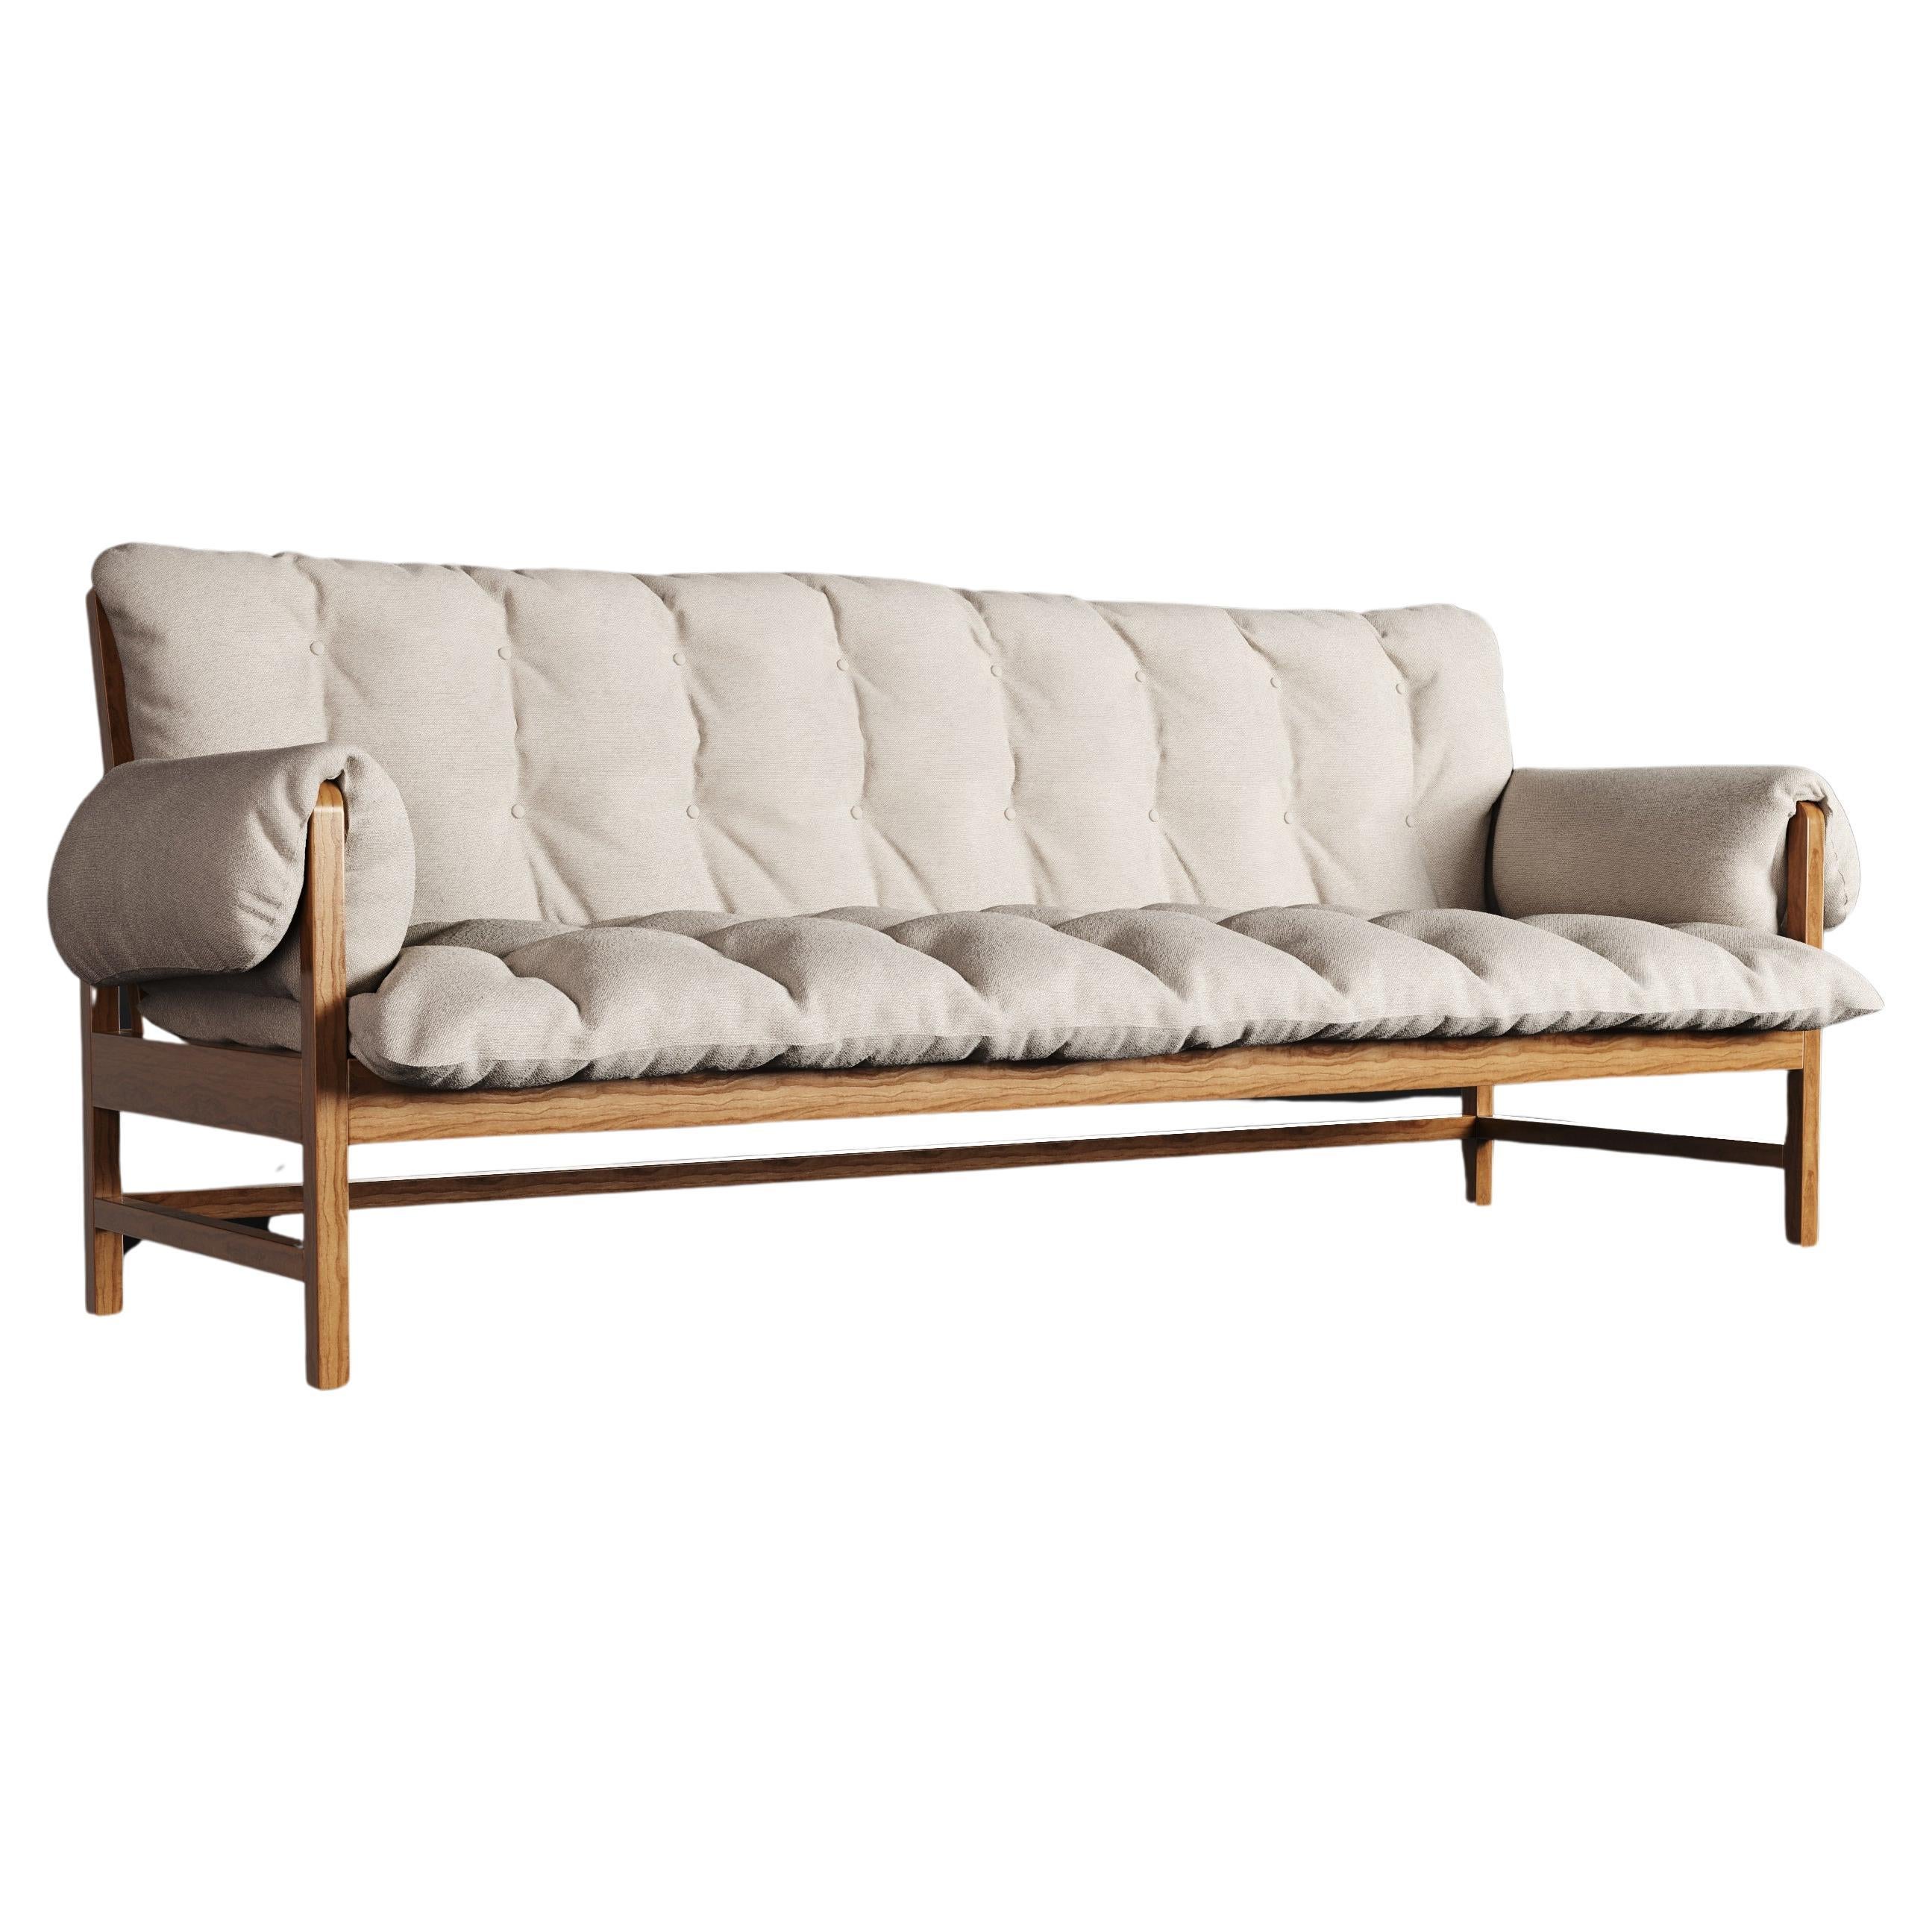 The Lazy. Brazilian solid wood with linen upholstery Design by Amilcar Oliveira For Sale